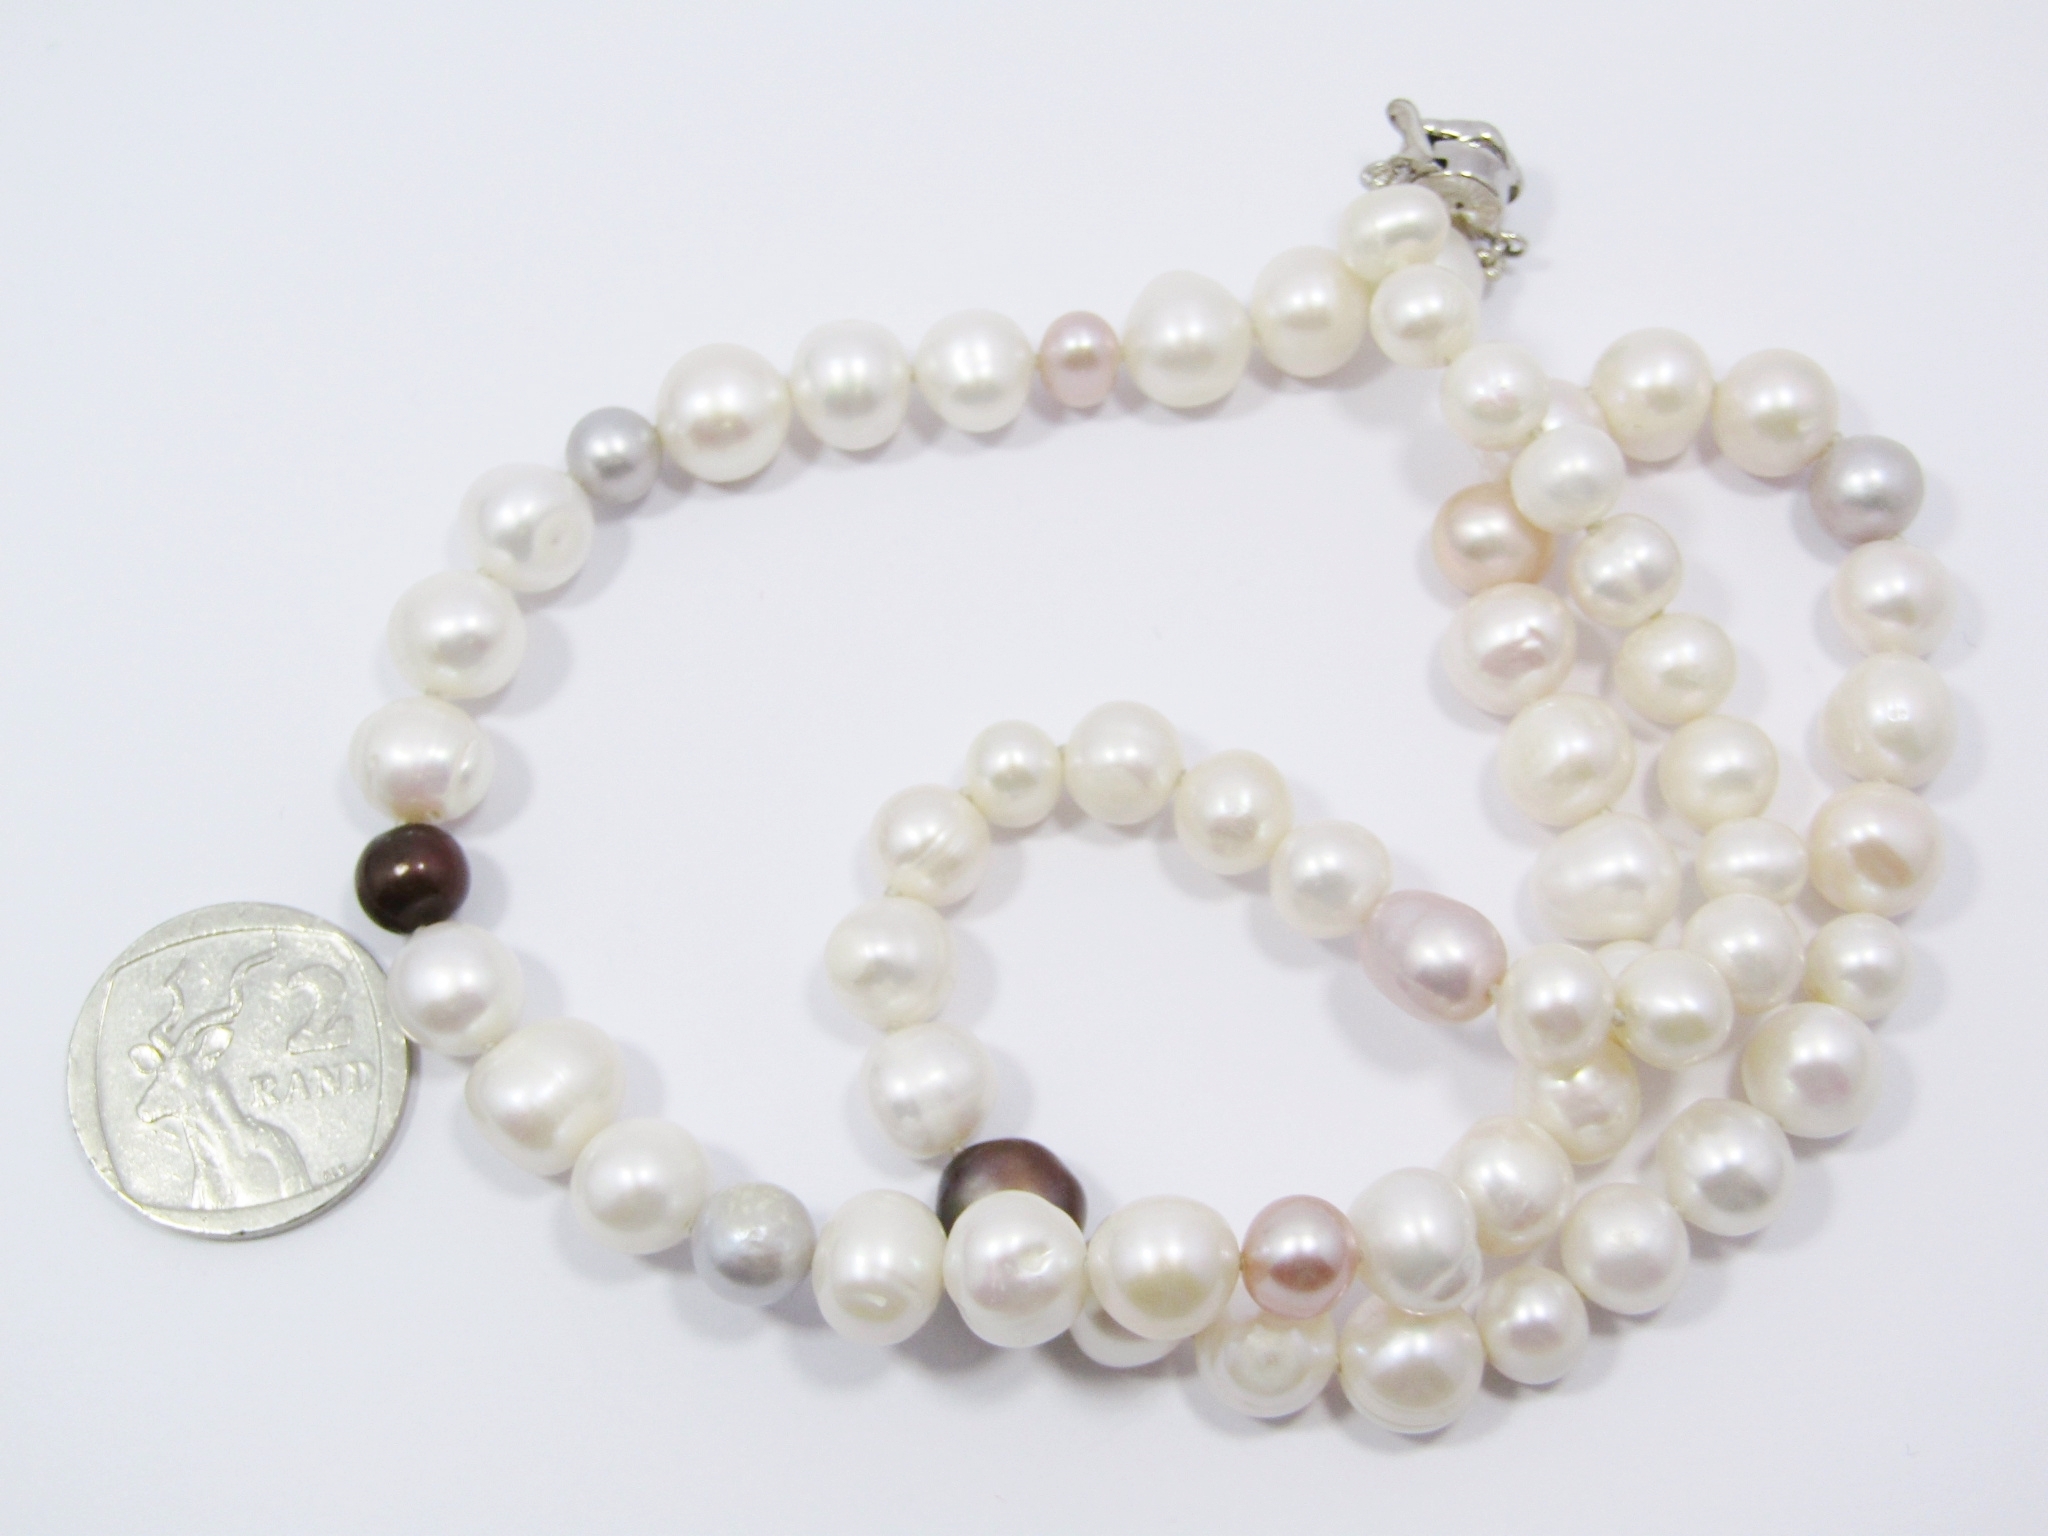 A Gorgeous String Of Fresh Water Pearls With a Sterling Silver Clasp